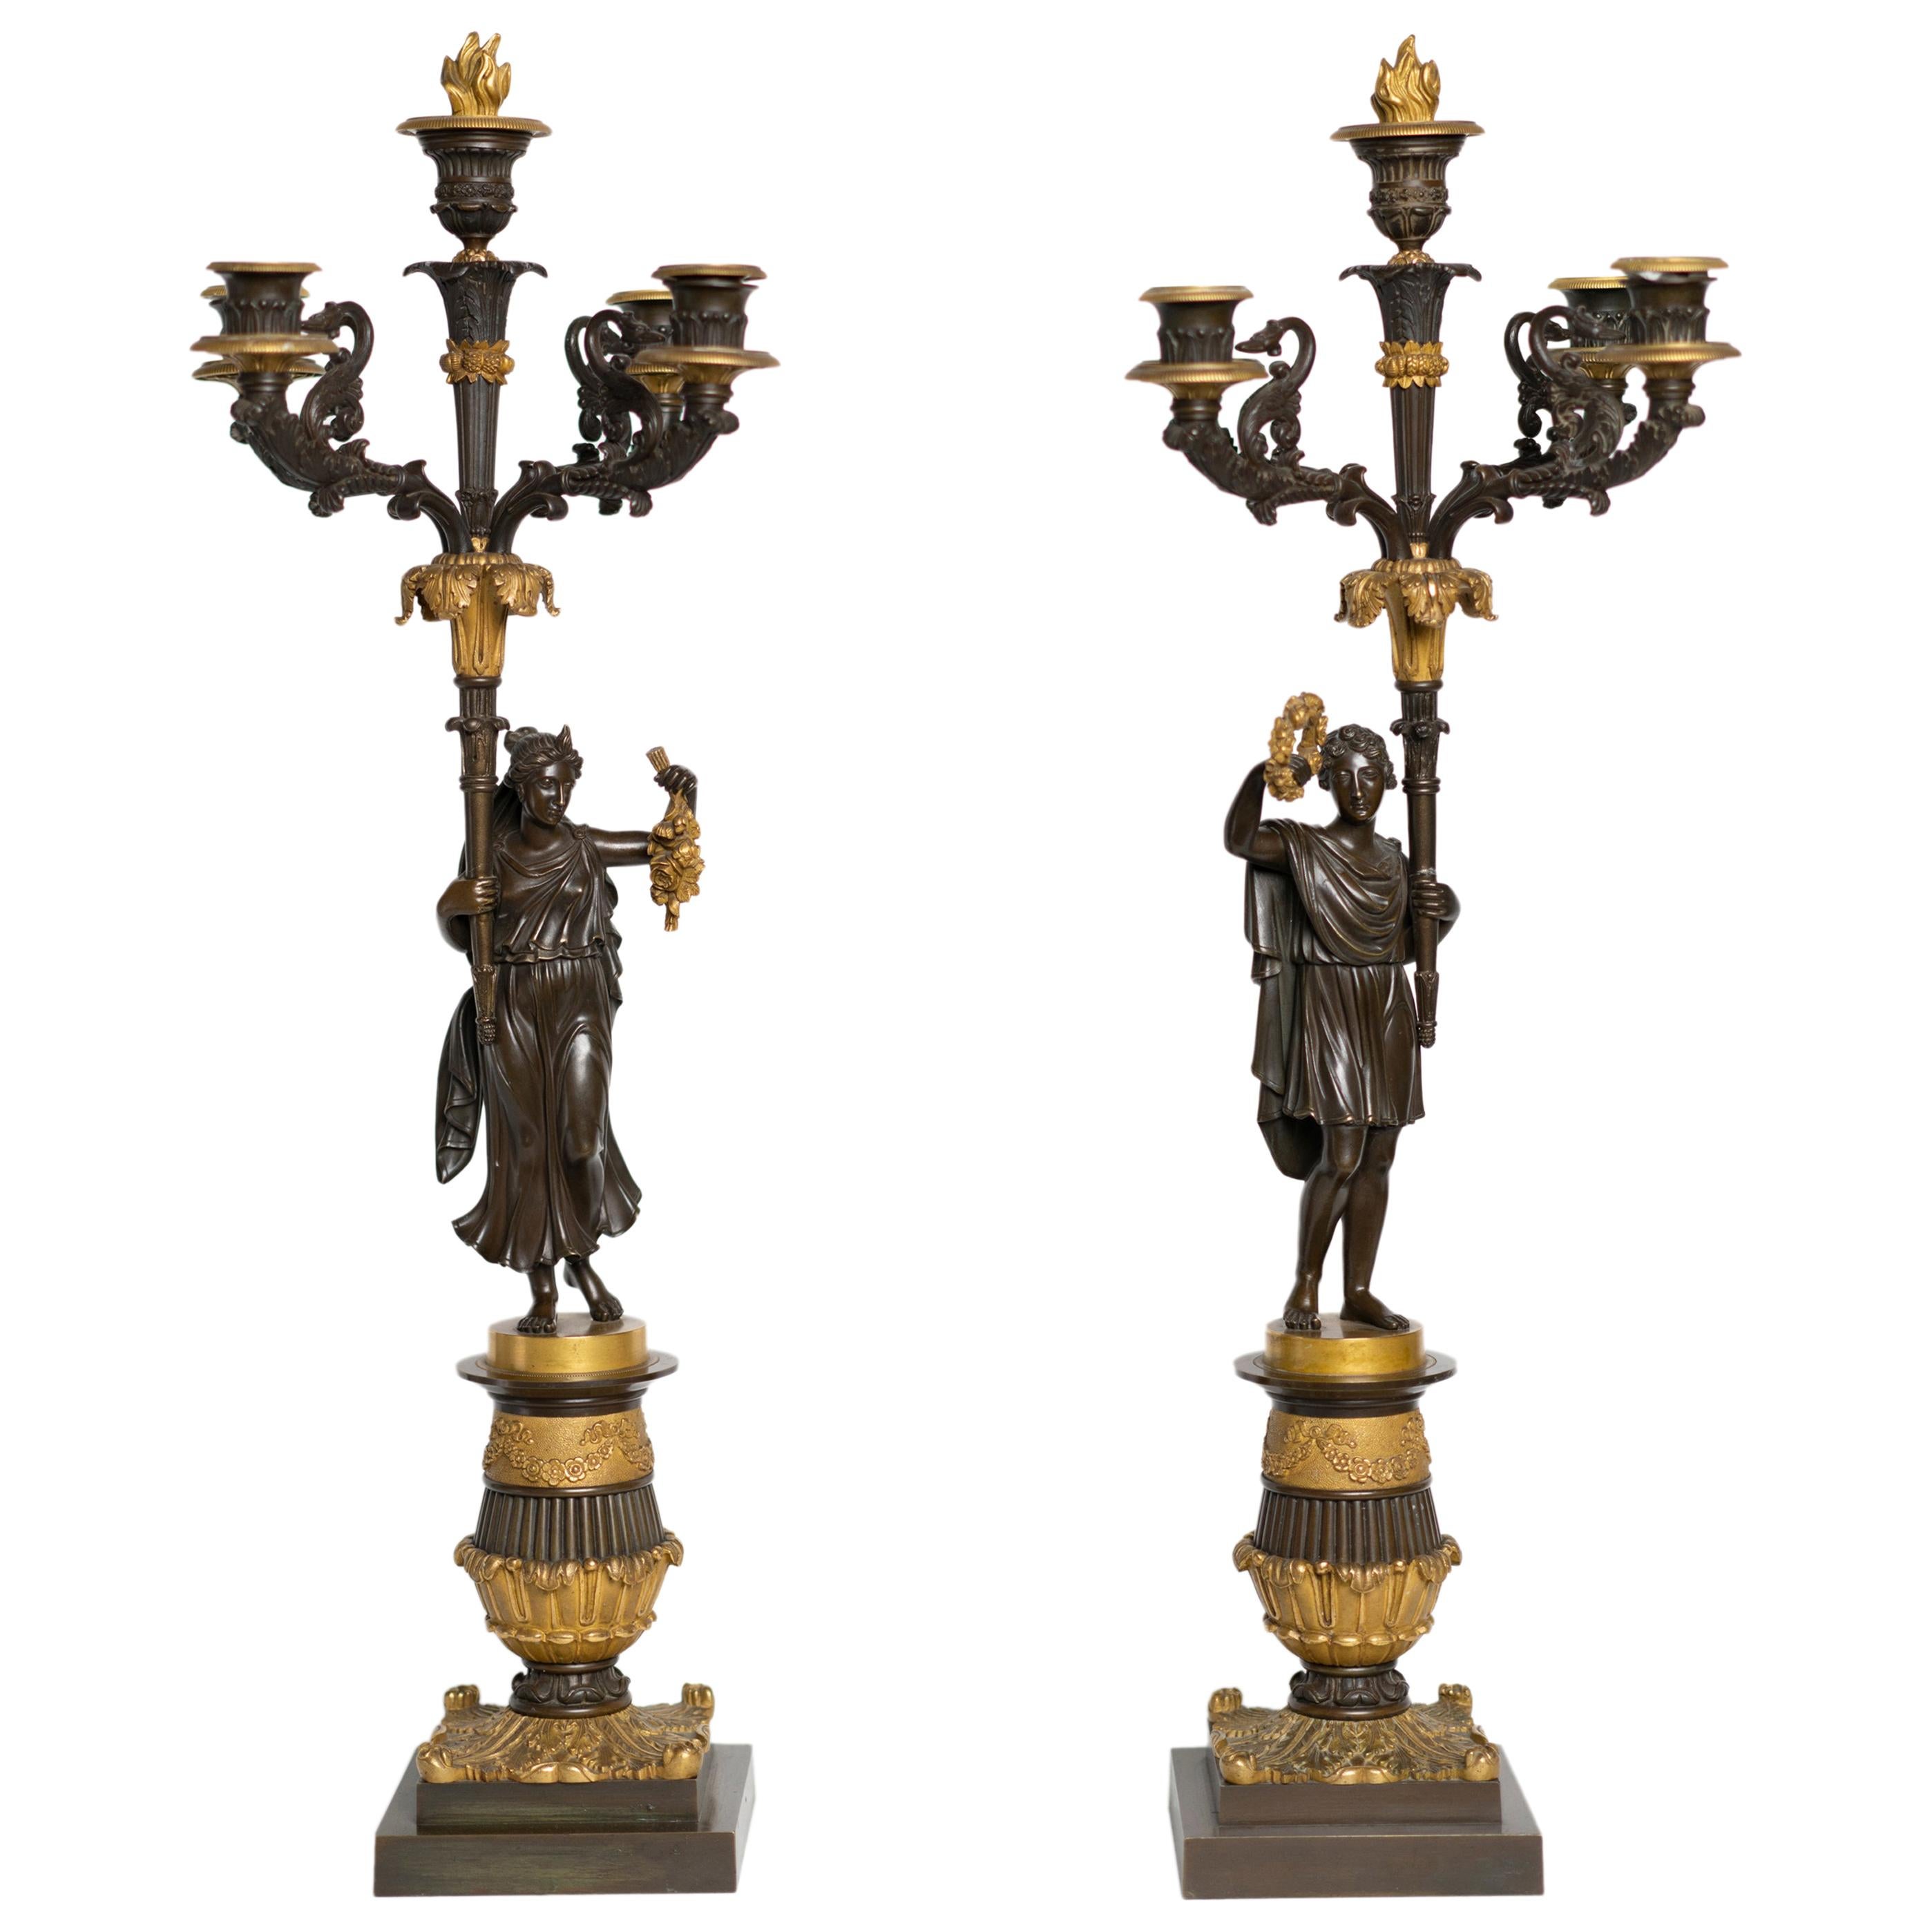 Pair of Charles X Period Gilt and Patinated Bronze Candelabras of a Roman Couple